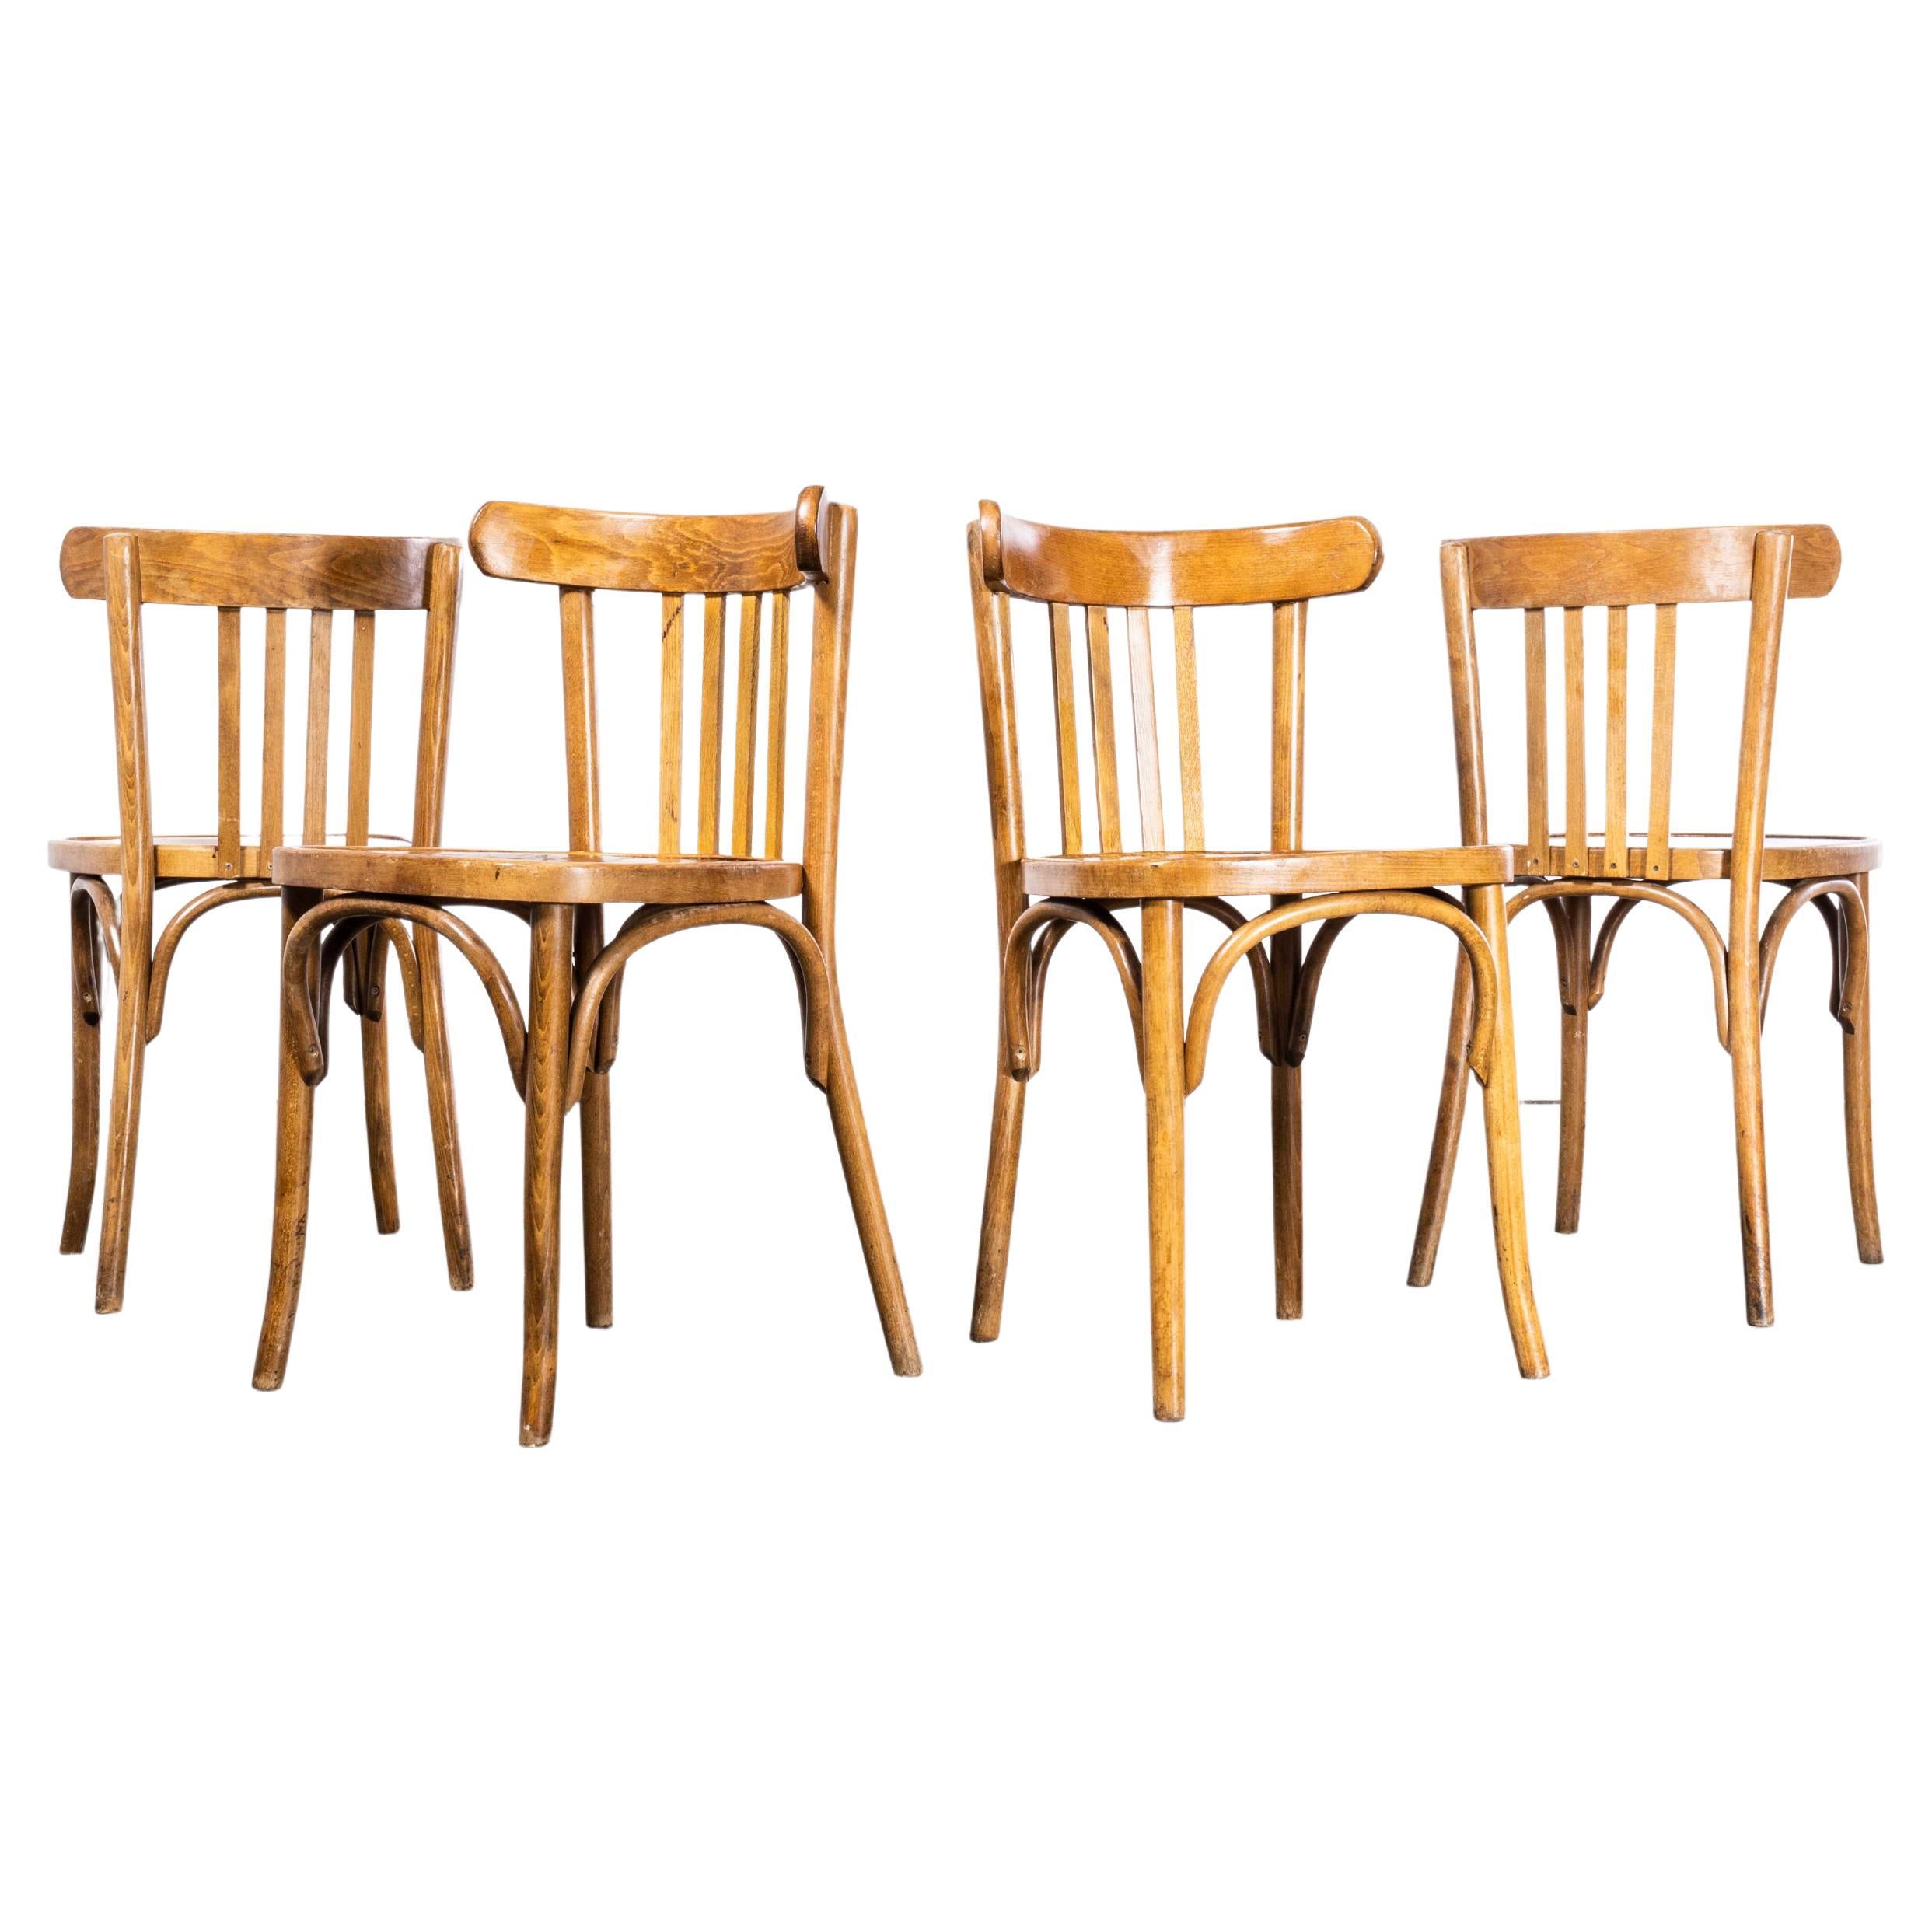 1950's Luterma Honey Beech Bentwood Dining Chair - Set Of Four For Sale